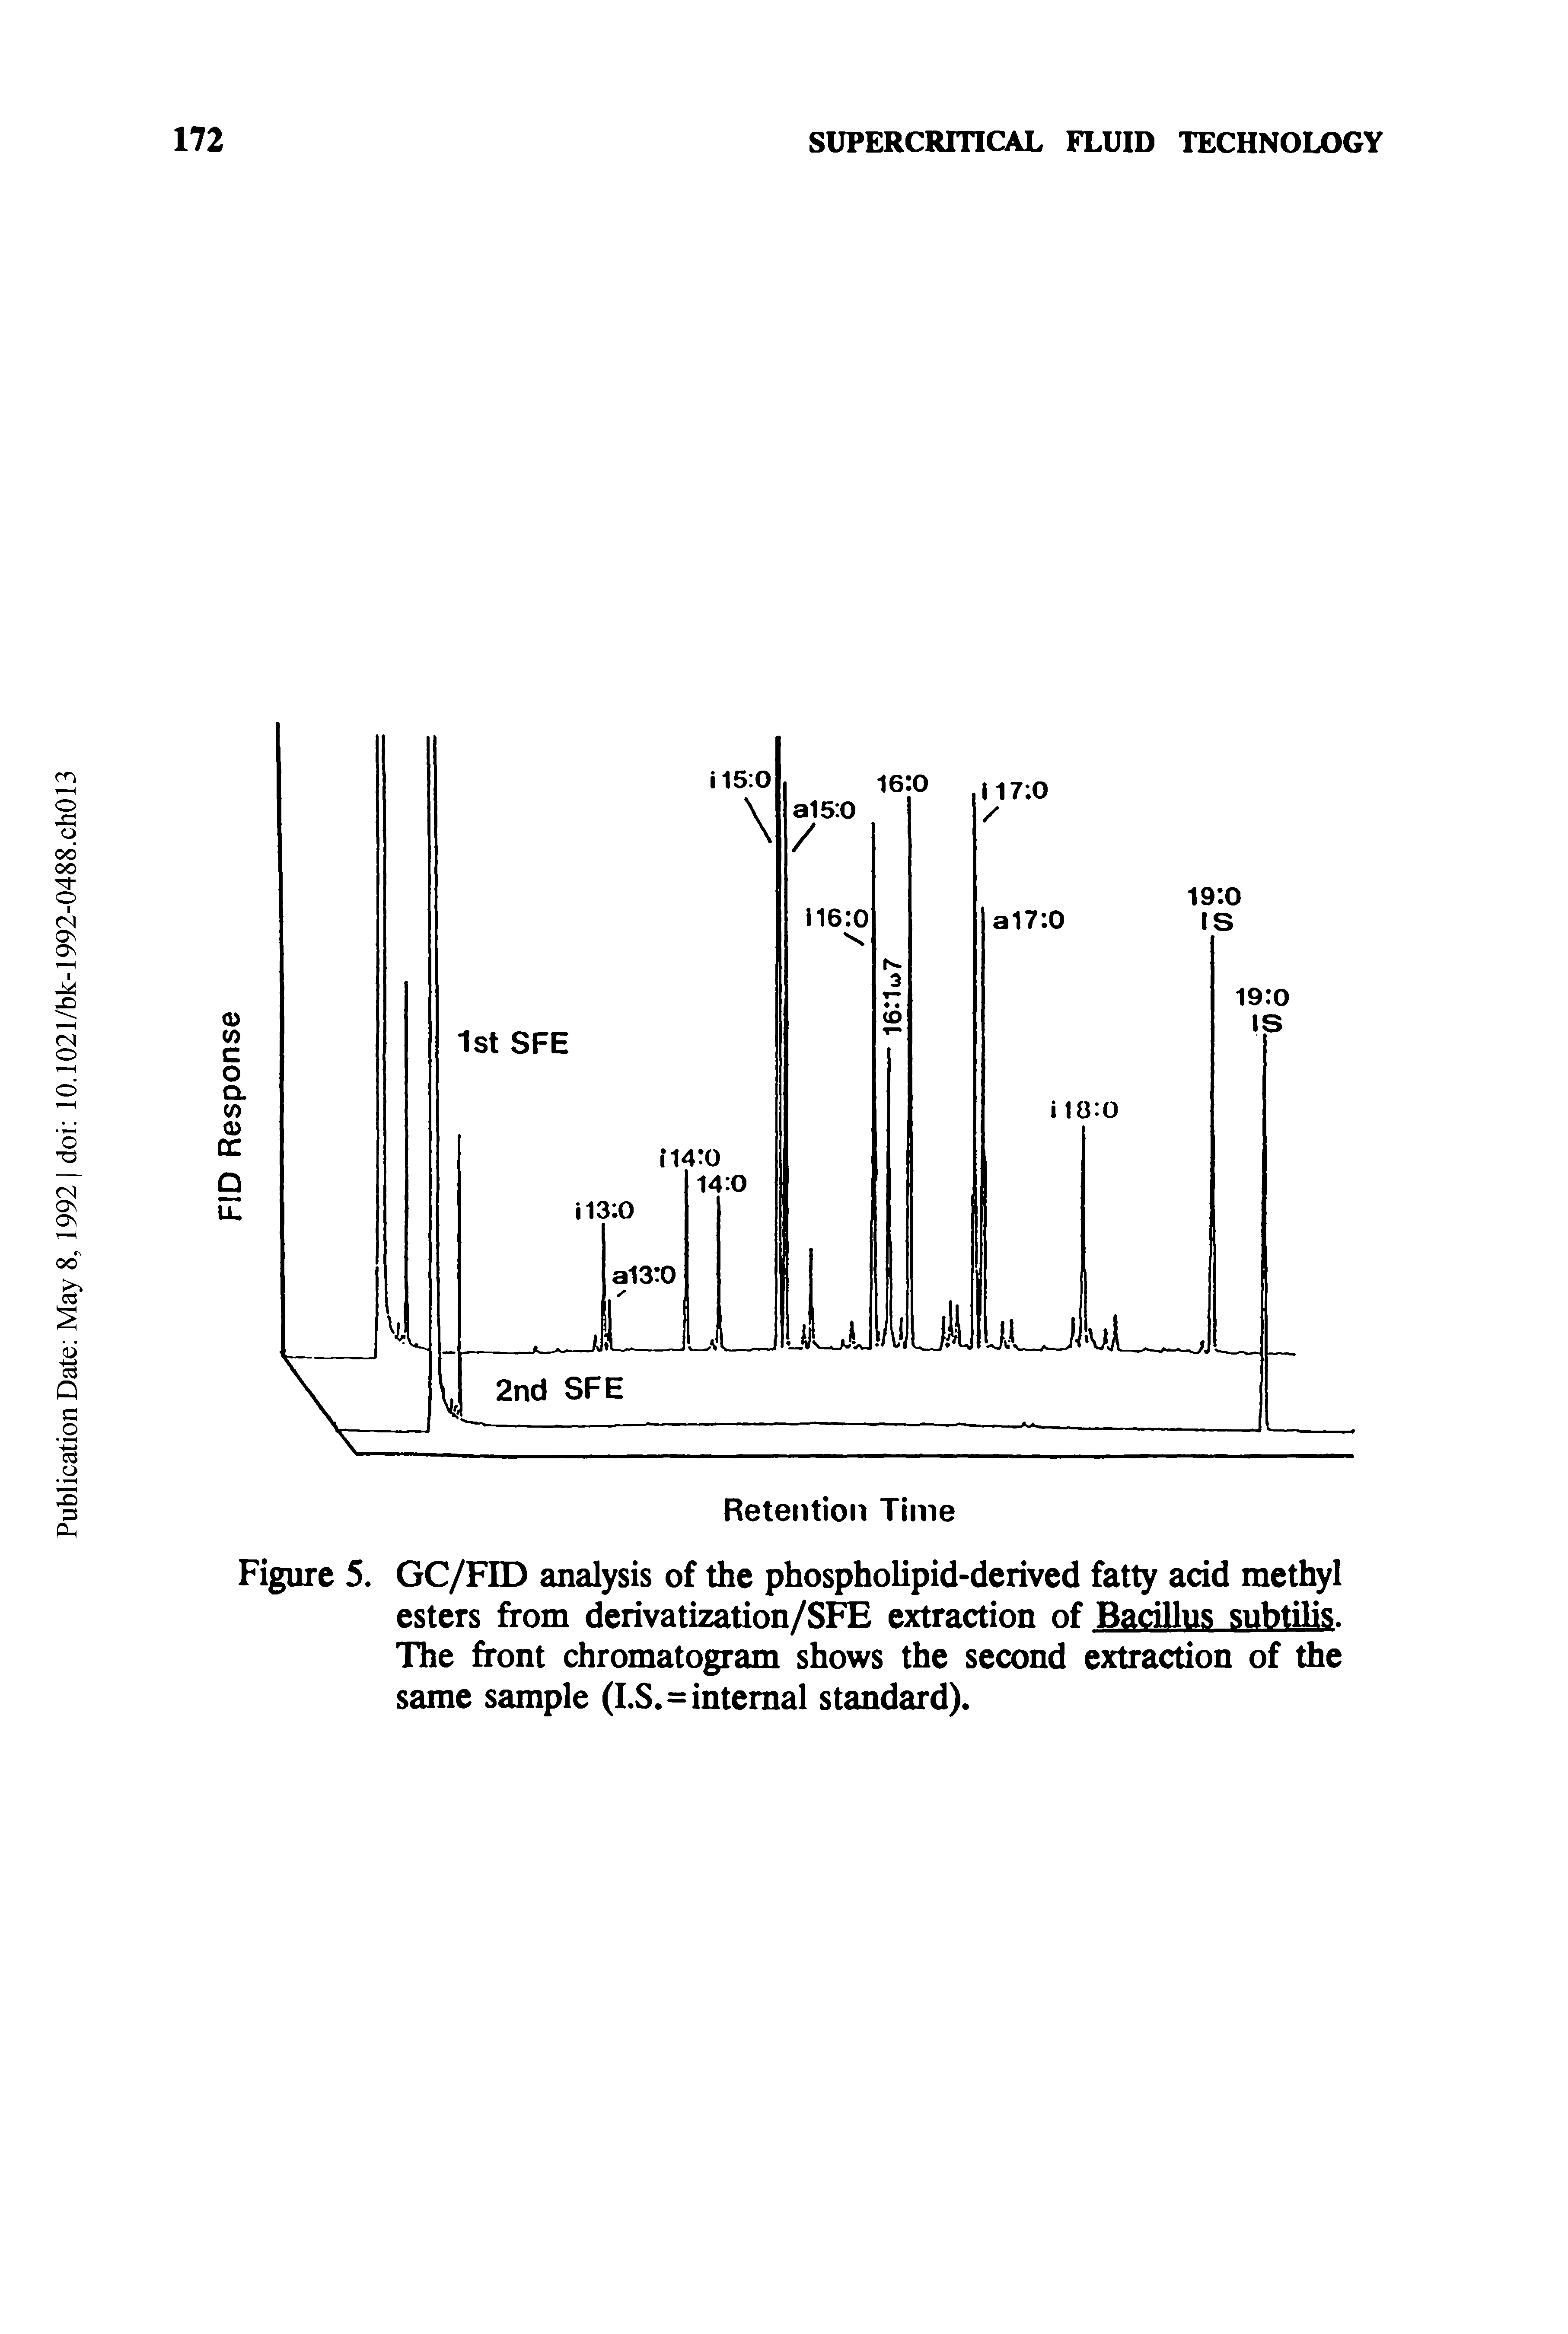 Figure 5. GC/FTD analysis of the phospholipid-derived fatty acid methyl esters from derivatization/SFE extraction of Bacillus suhtilis. The front chromatogram shows the second extraction of the same sample (I.S.=internal standard).